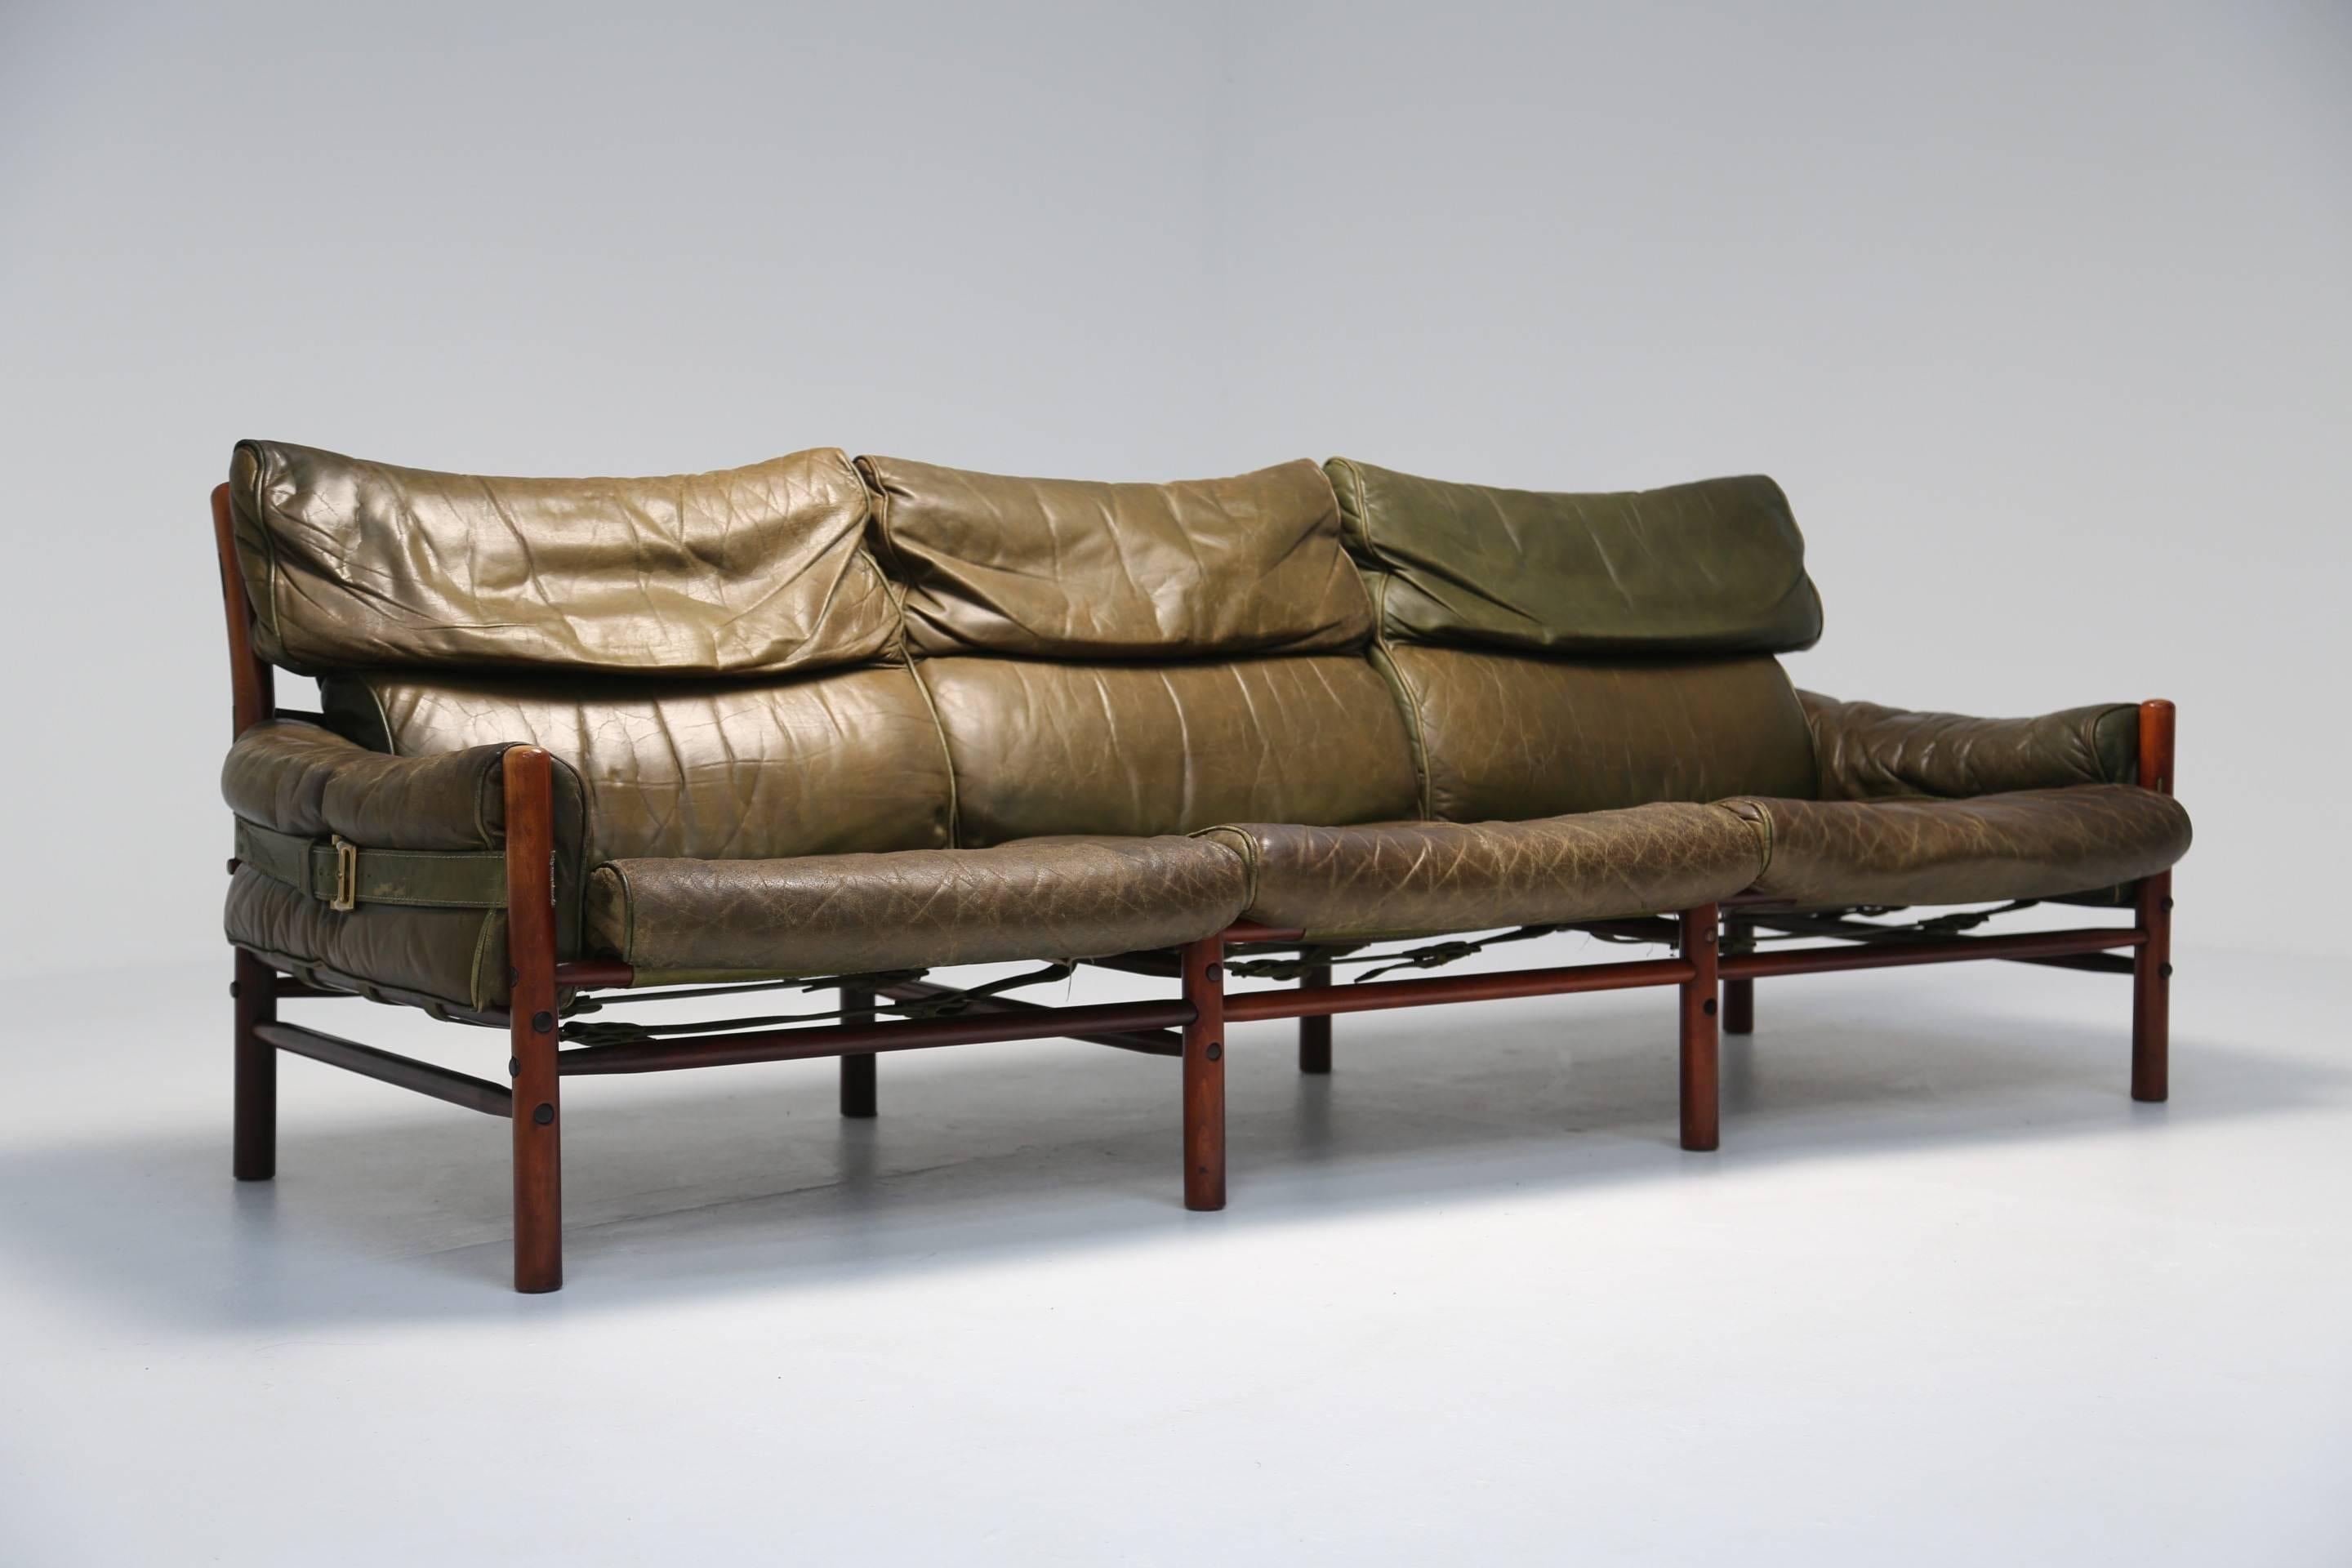 A handsome example of the Classic 'Kontiki' sofa designed by Arne Norell. Produced by Mobel AB Arne Norell, Sweden, circa 1970 this three-seat sofa has a richly colored wooden frame and uses beautifully worn green leather.